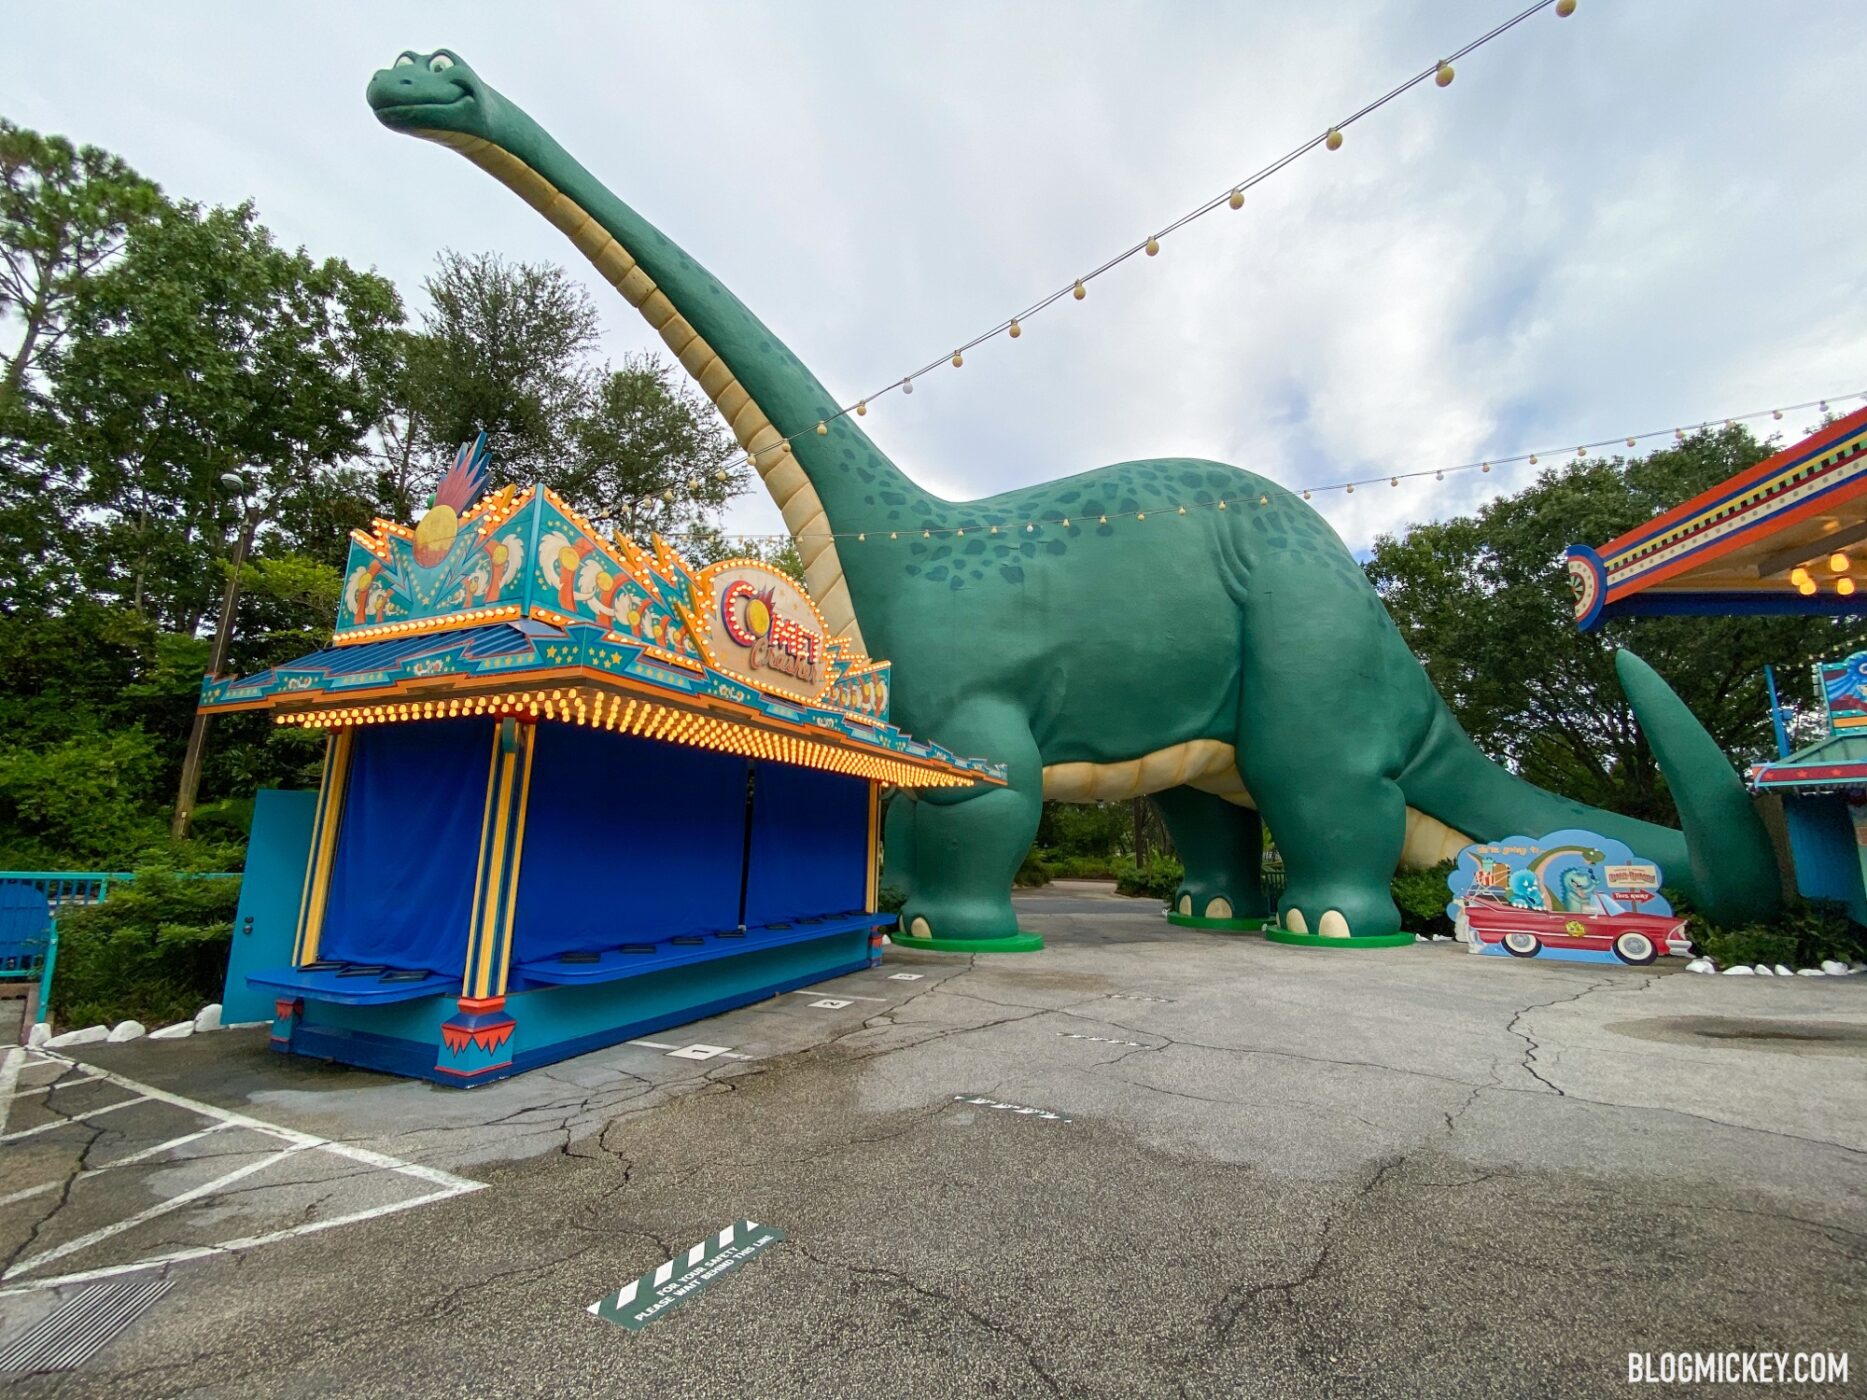 DinoLand USA Carnival Games Reopen With NEW Prizes Themed to the Land